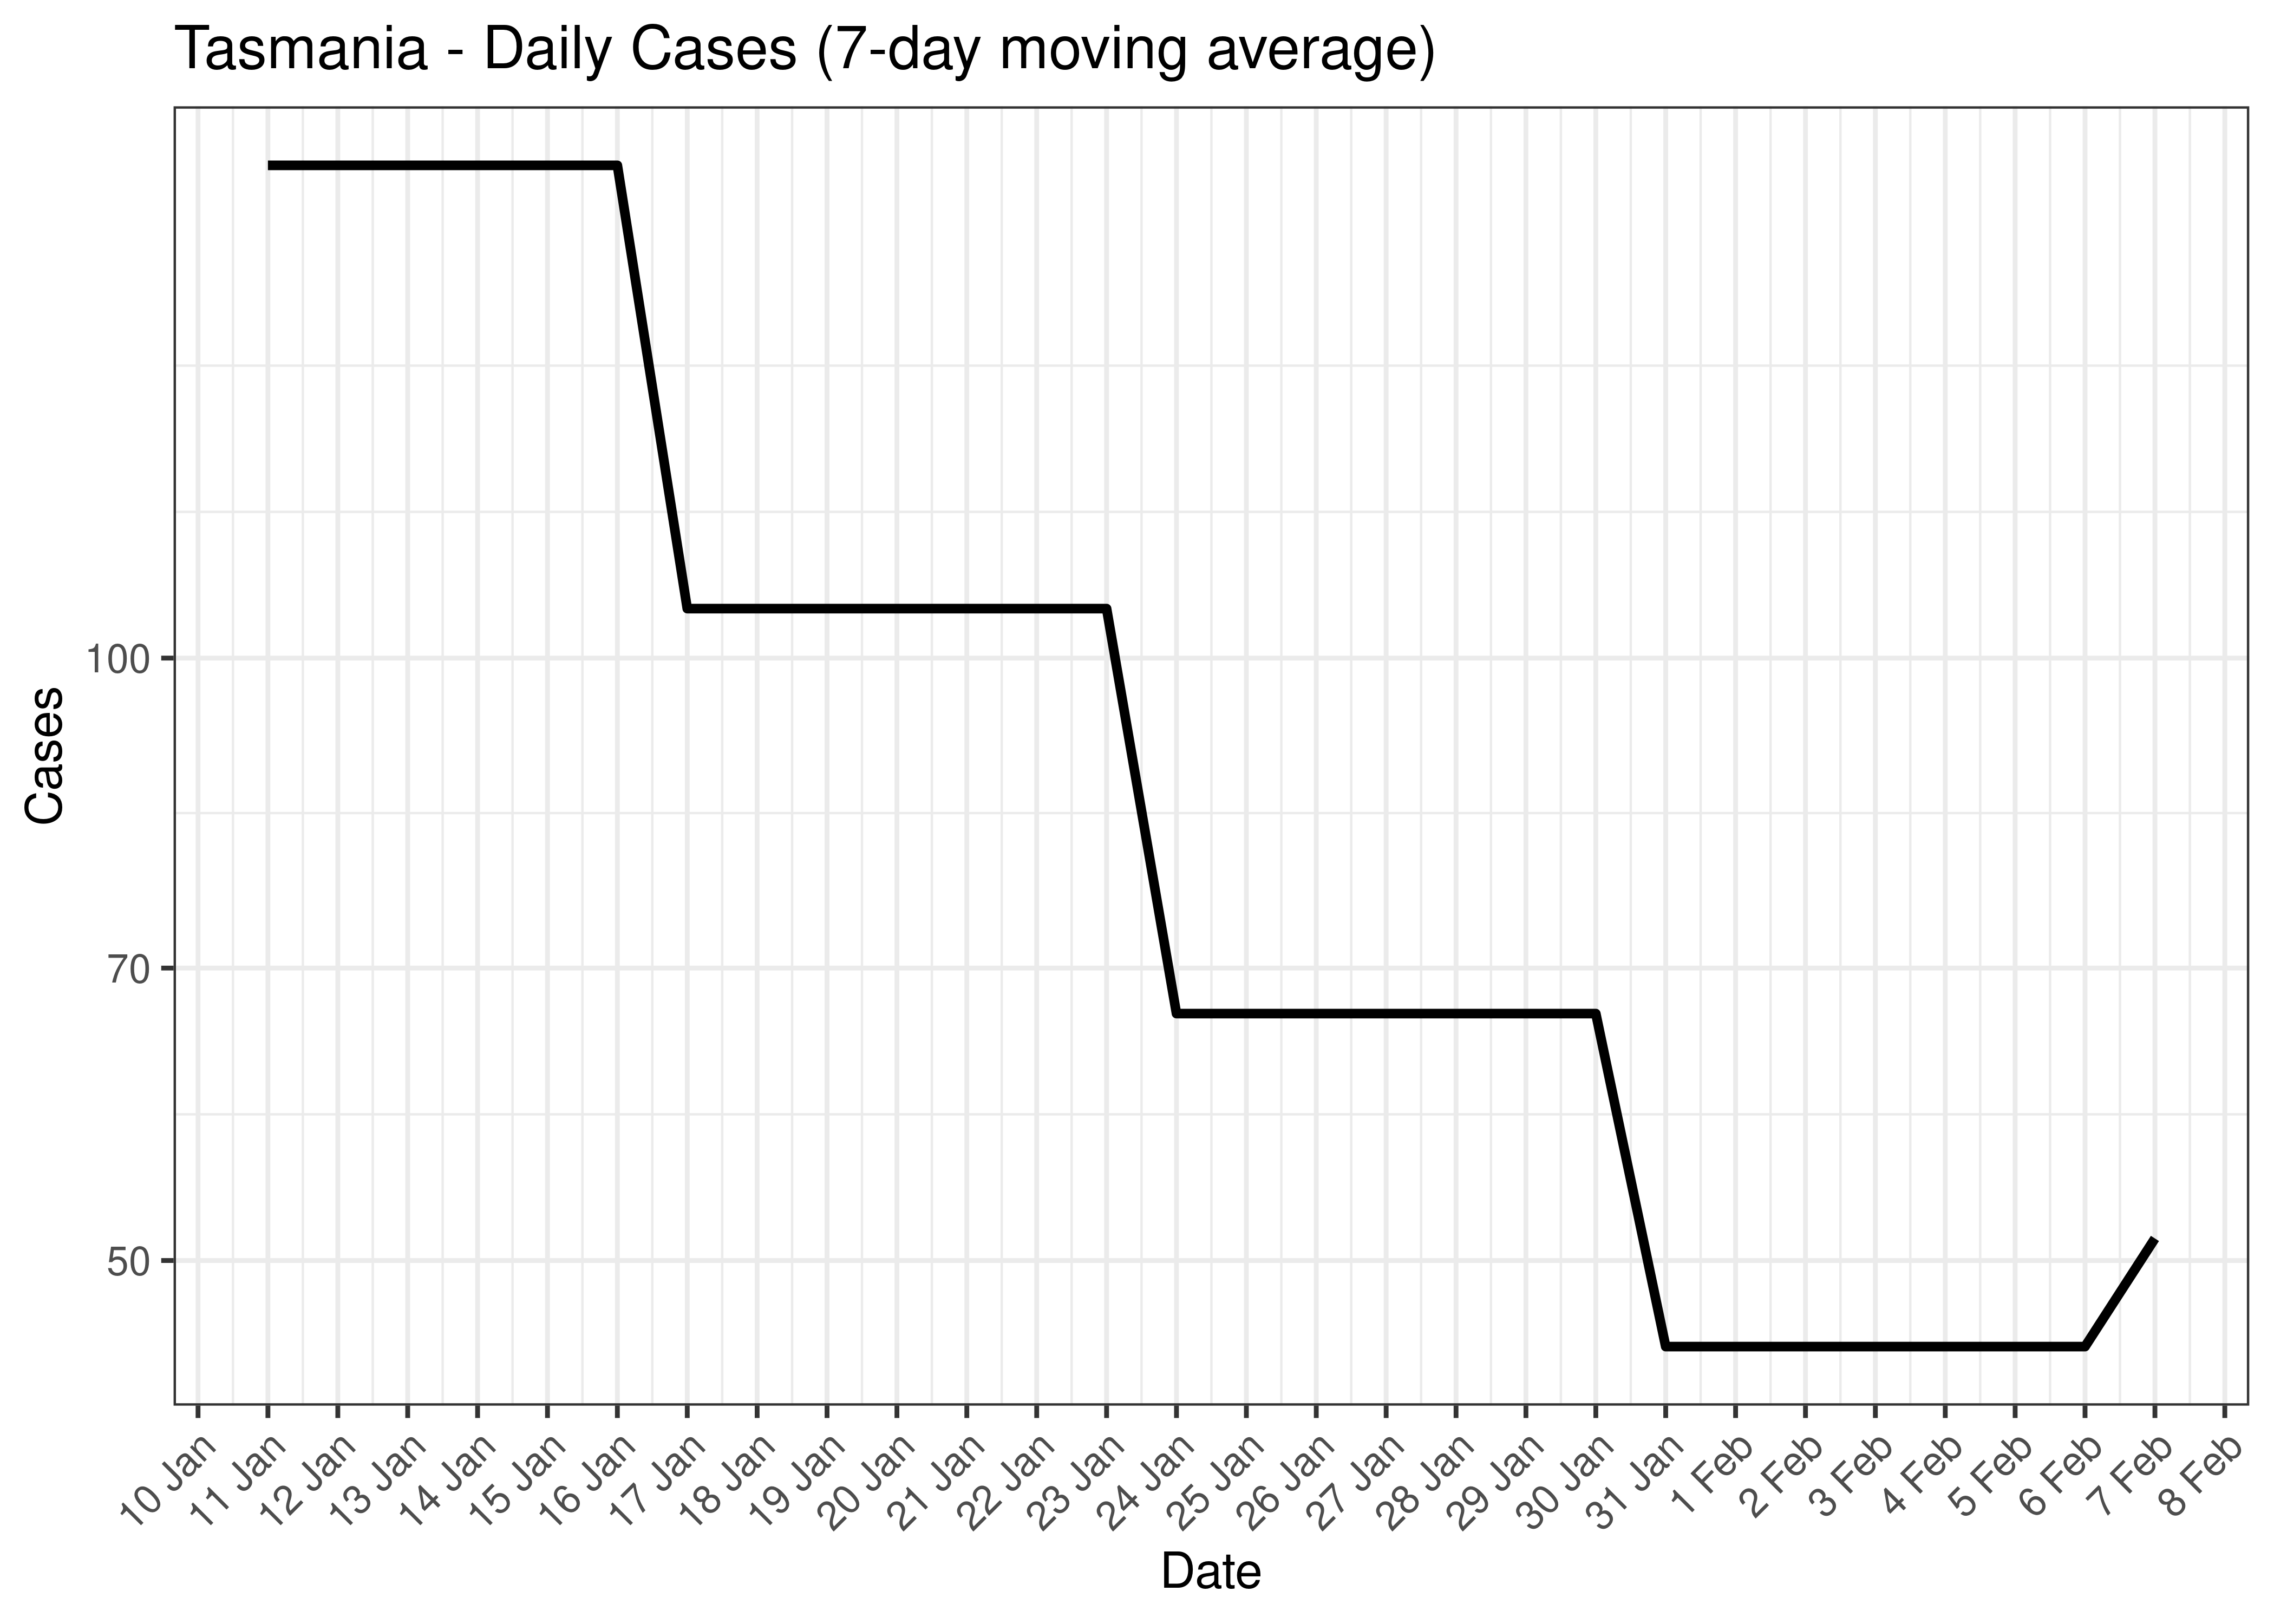 Tasmania - Daily Cases for Last 30-days (7-day moving average)